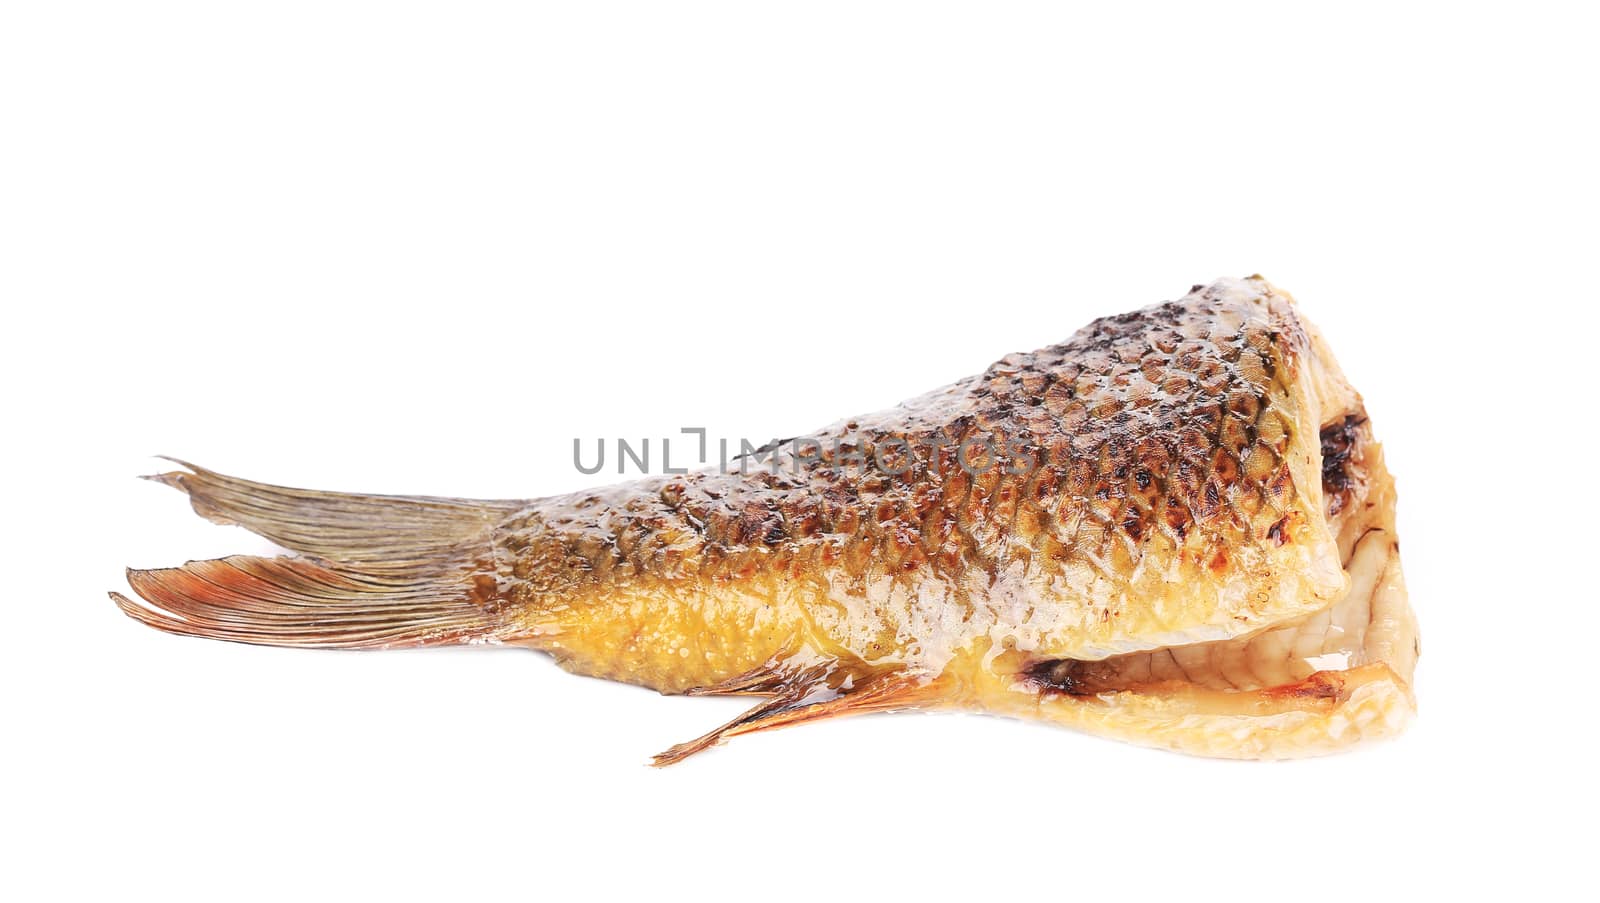 Grilled carp fish tail. Isolated on a white background.